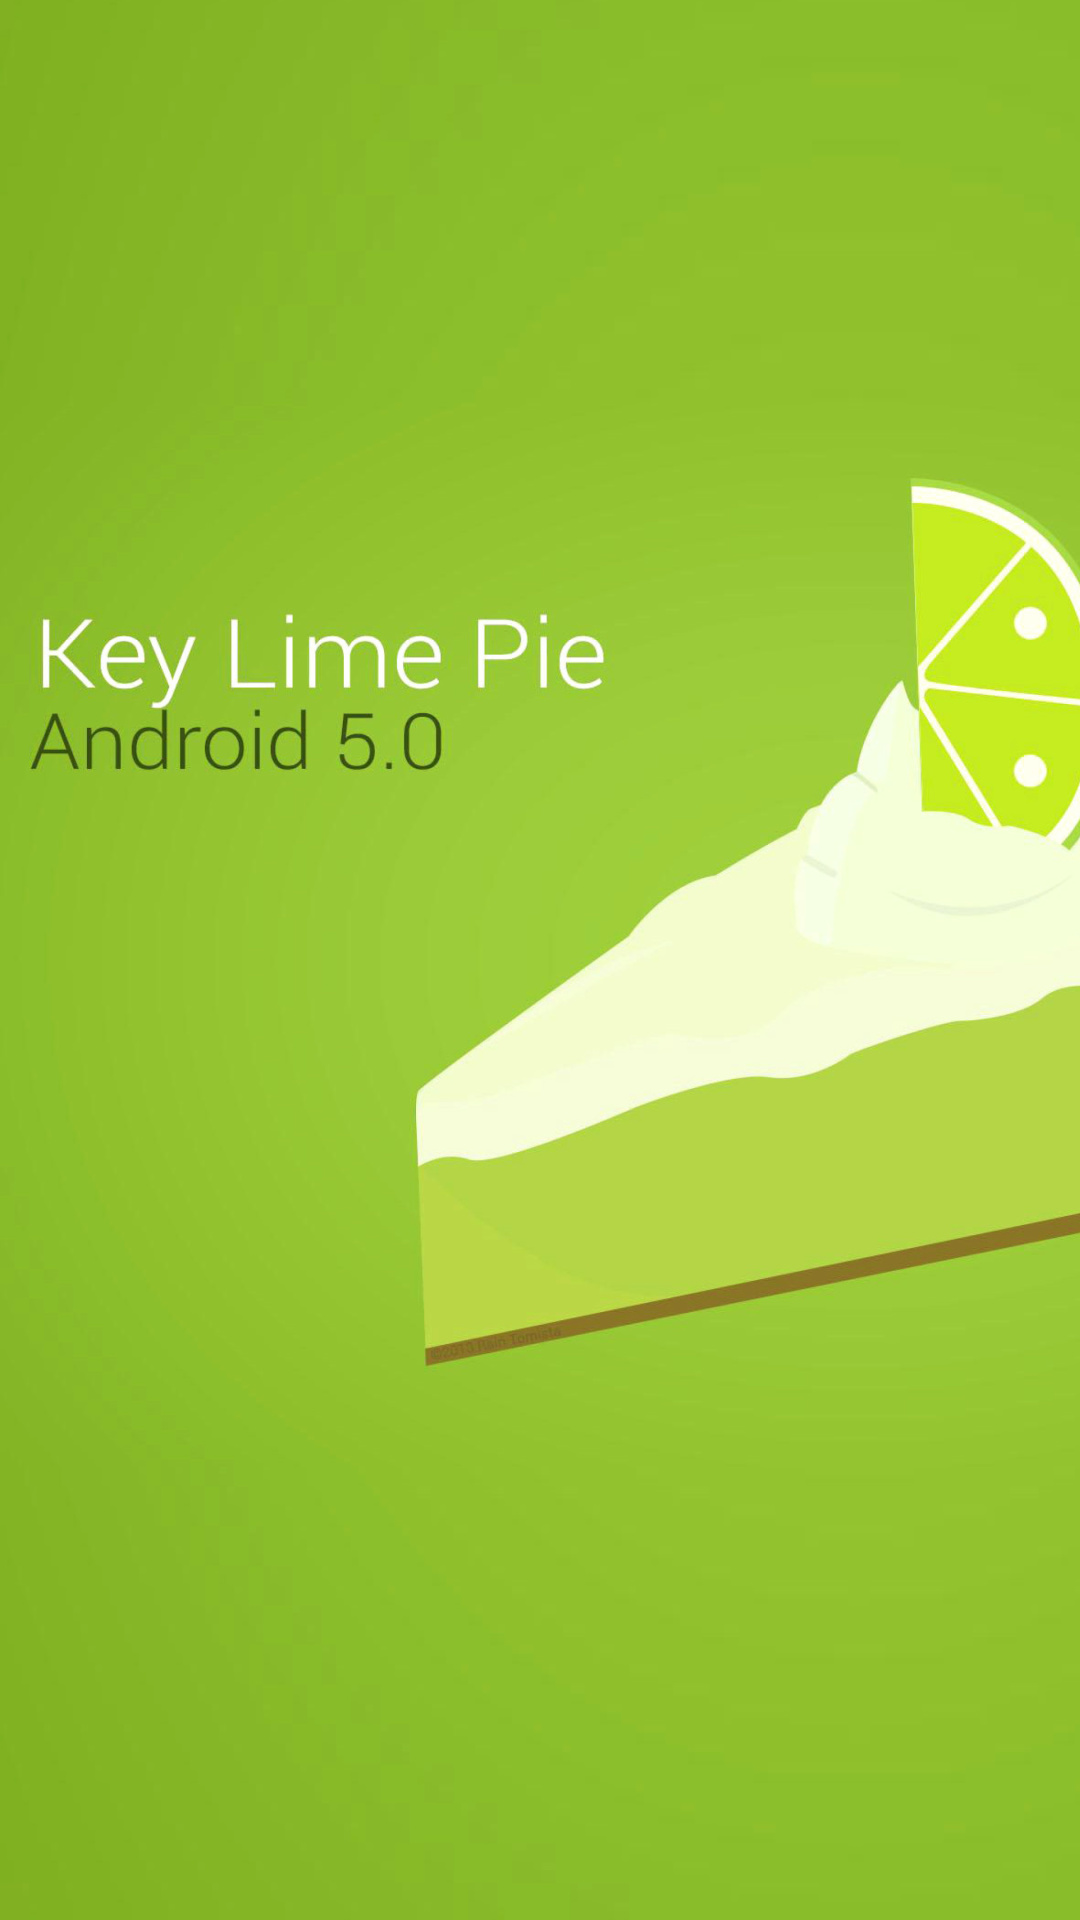 Das Concept Android 5.0 Key Lime Pie Wallpaper 1080x1920